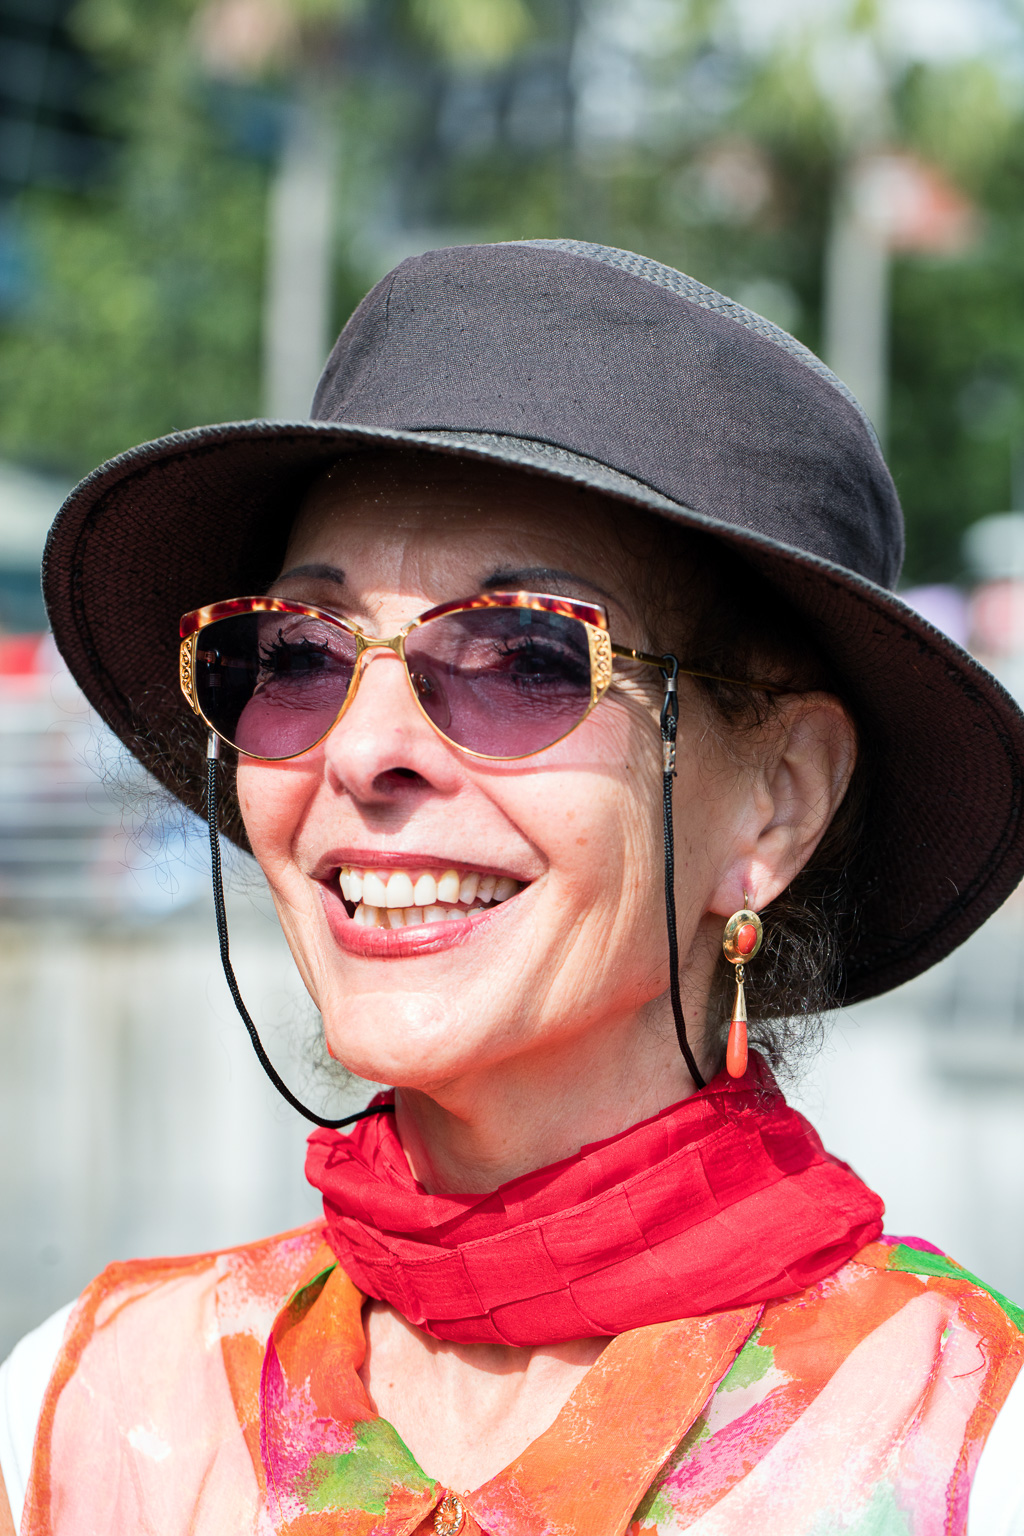 Smiling woman wearing hat and sunglasses with red scarf